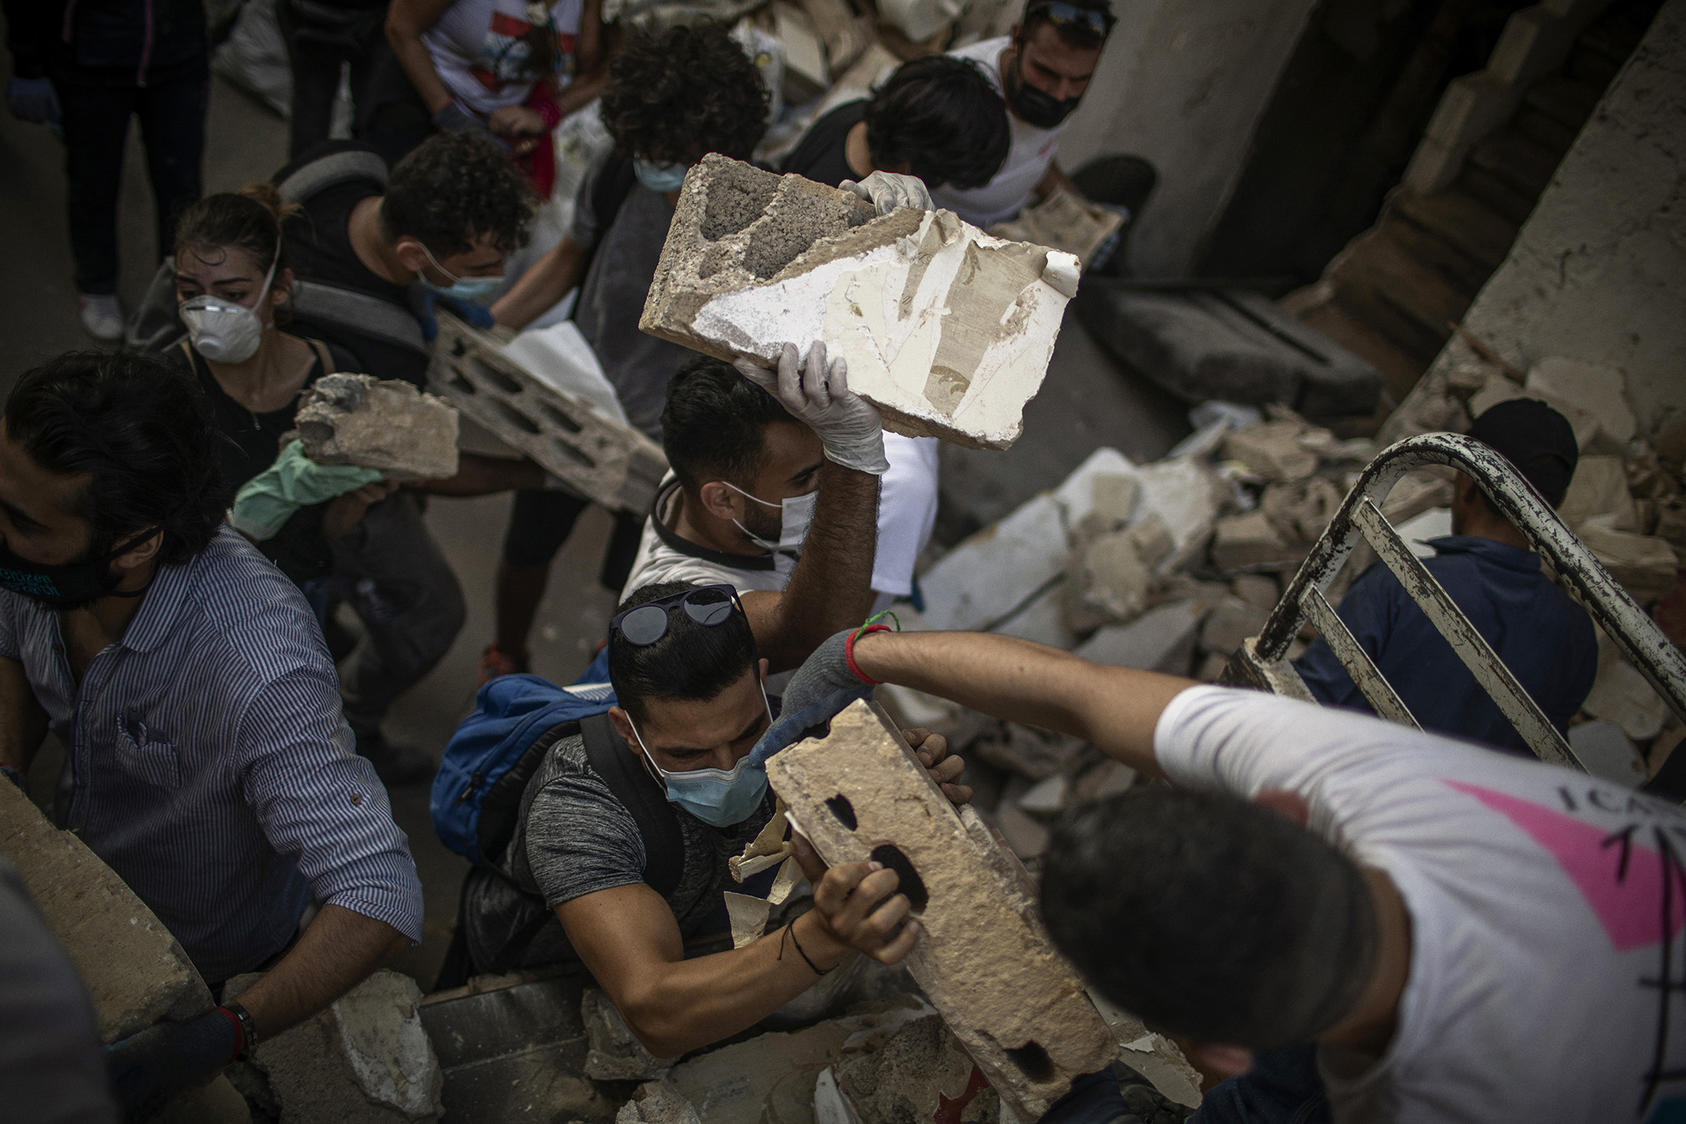 People search through rubble on Thursday, Aug. 6, 2020, in Beirut, resulting from an explosion two days two days after a powerful explosion in Beirut flattened whole neighborhoods in the bustling metropolis. (Diego Ibarra Sanchez/The New York Times)